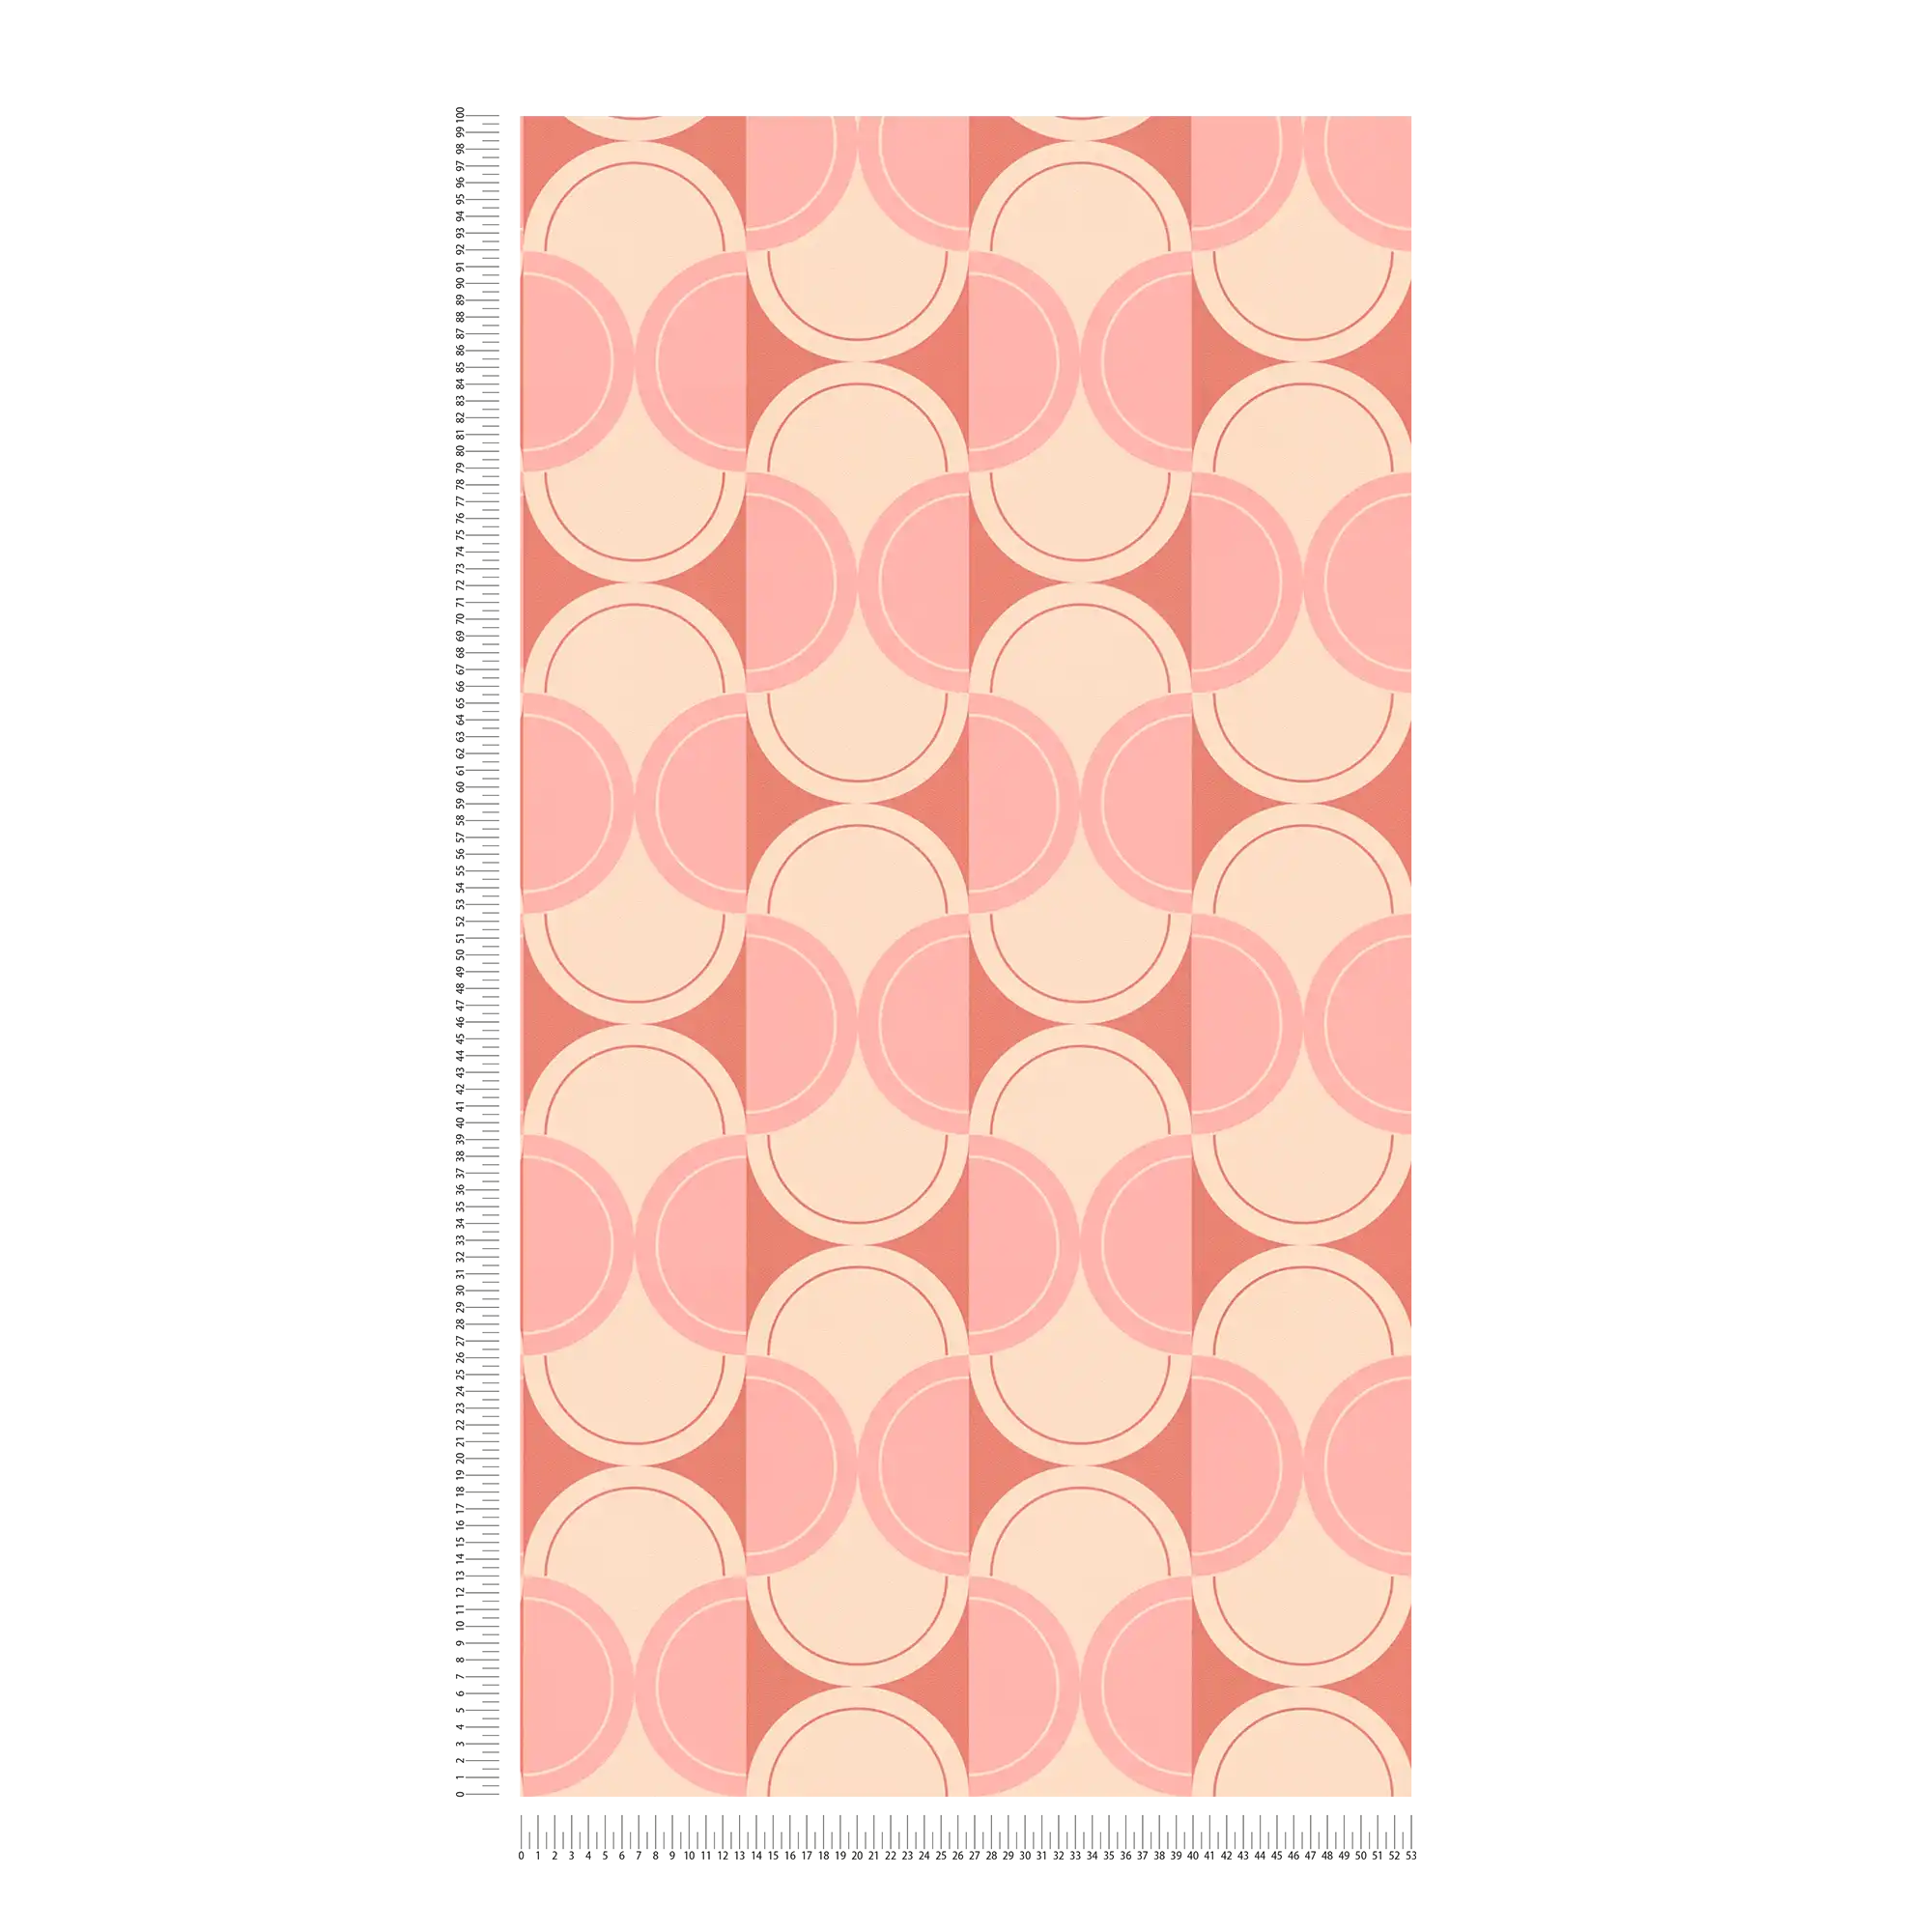             Retro non-woven wallpaper with half circle pattern - beige, pink, red
        